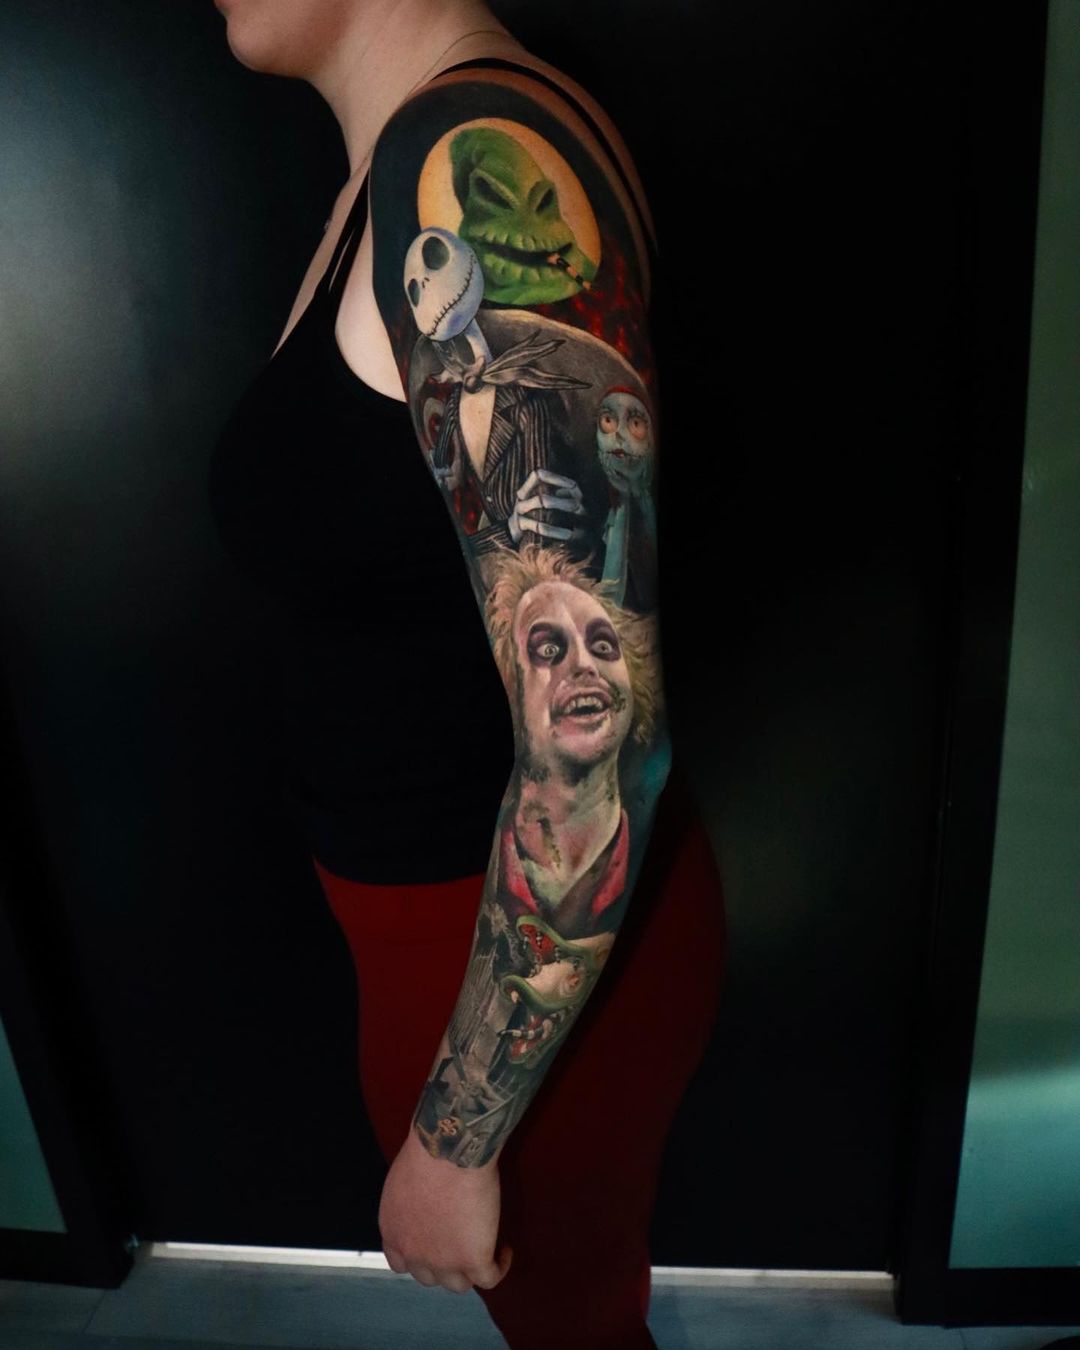 Mikes tattoo by Monsterbulle on DeviantArt